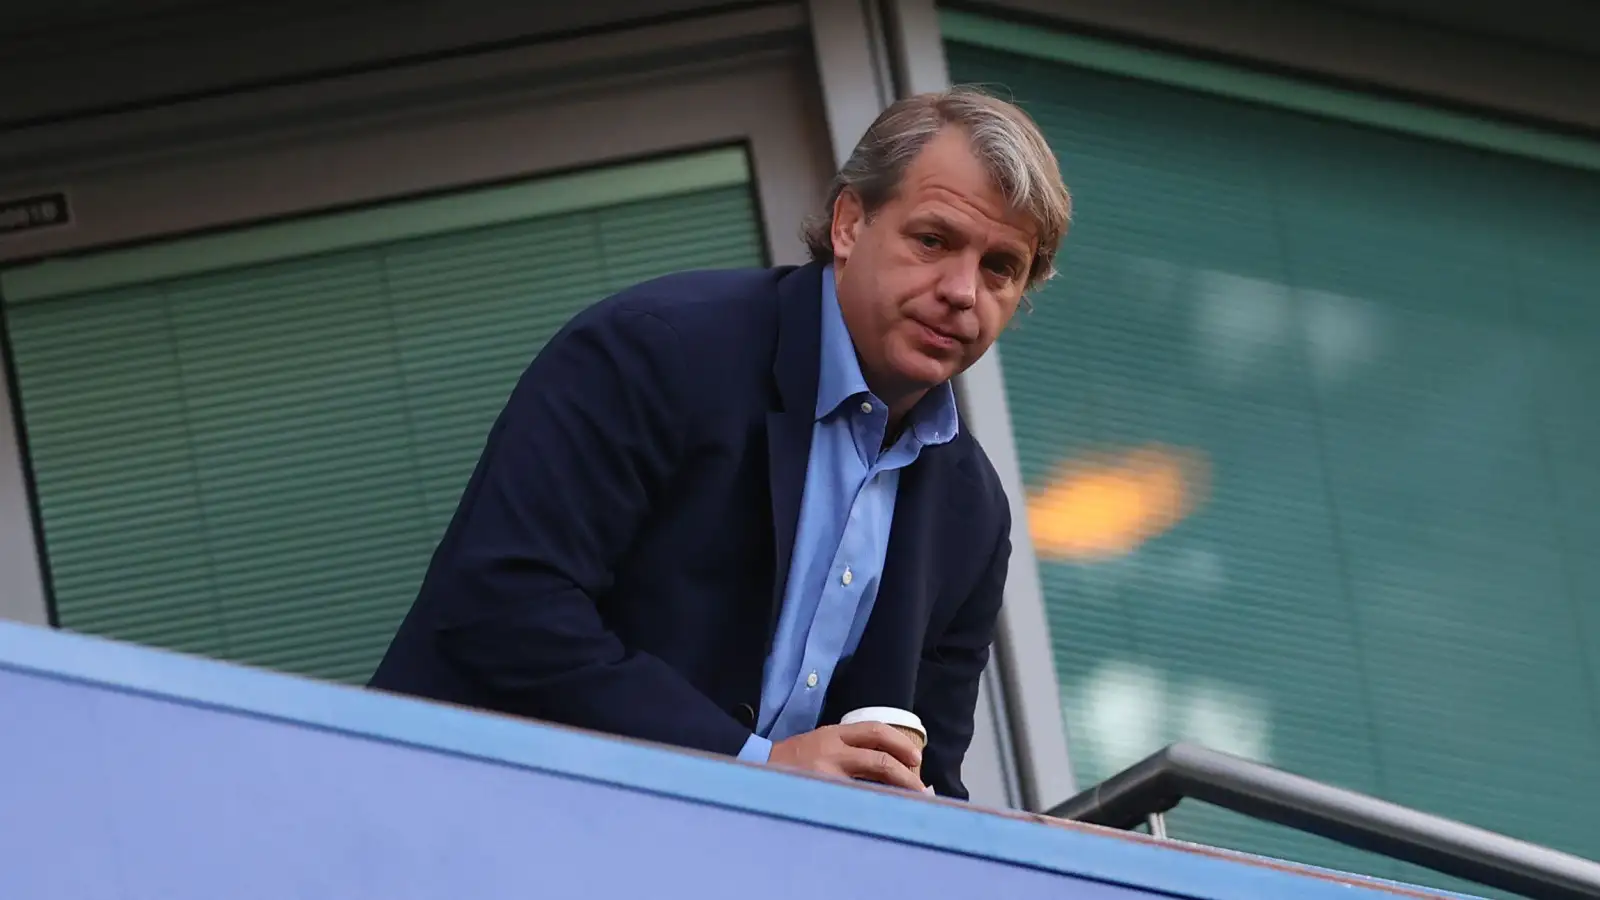 Chelsea part-owner Todd Boehly